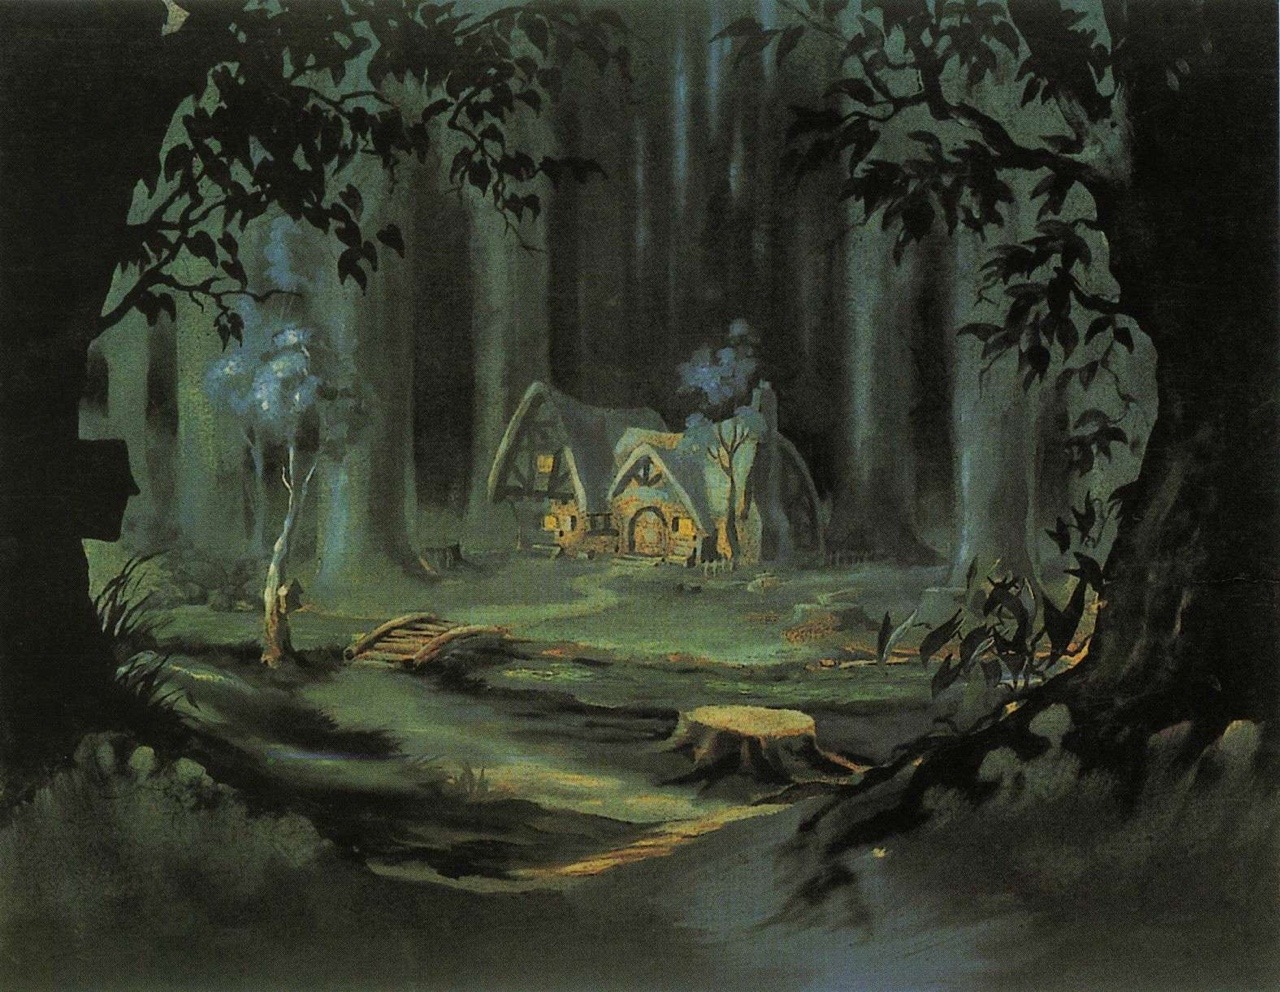 talesfromweirdland:  Animation art from Disney’s SNOW WHITE (1937).I’ve collected so much material I’ll have to do a follow-up in the next hour.